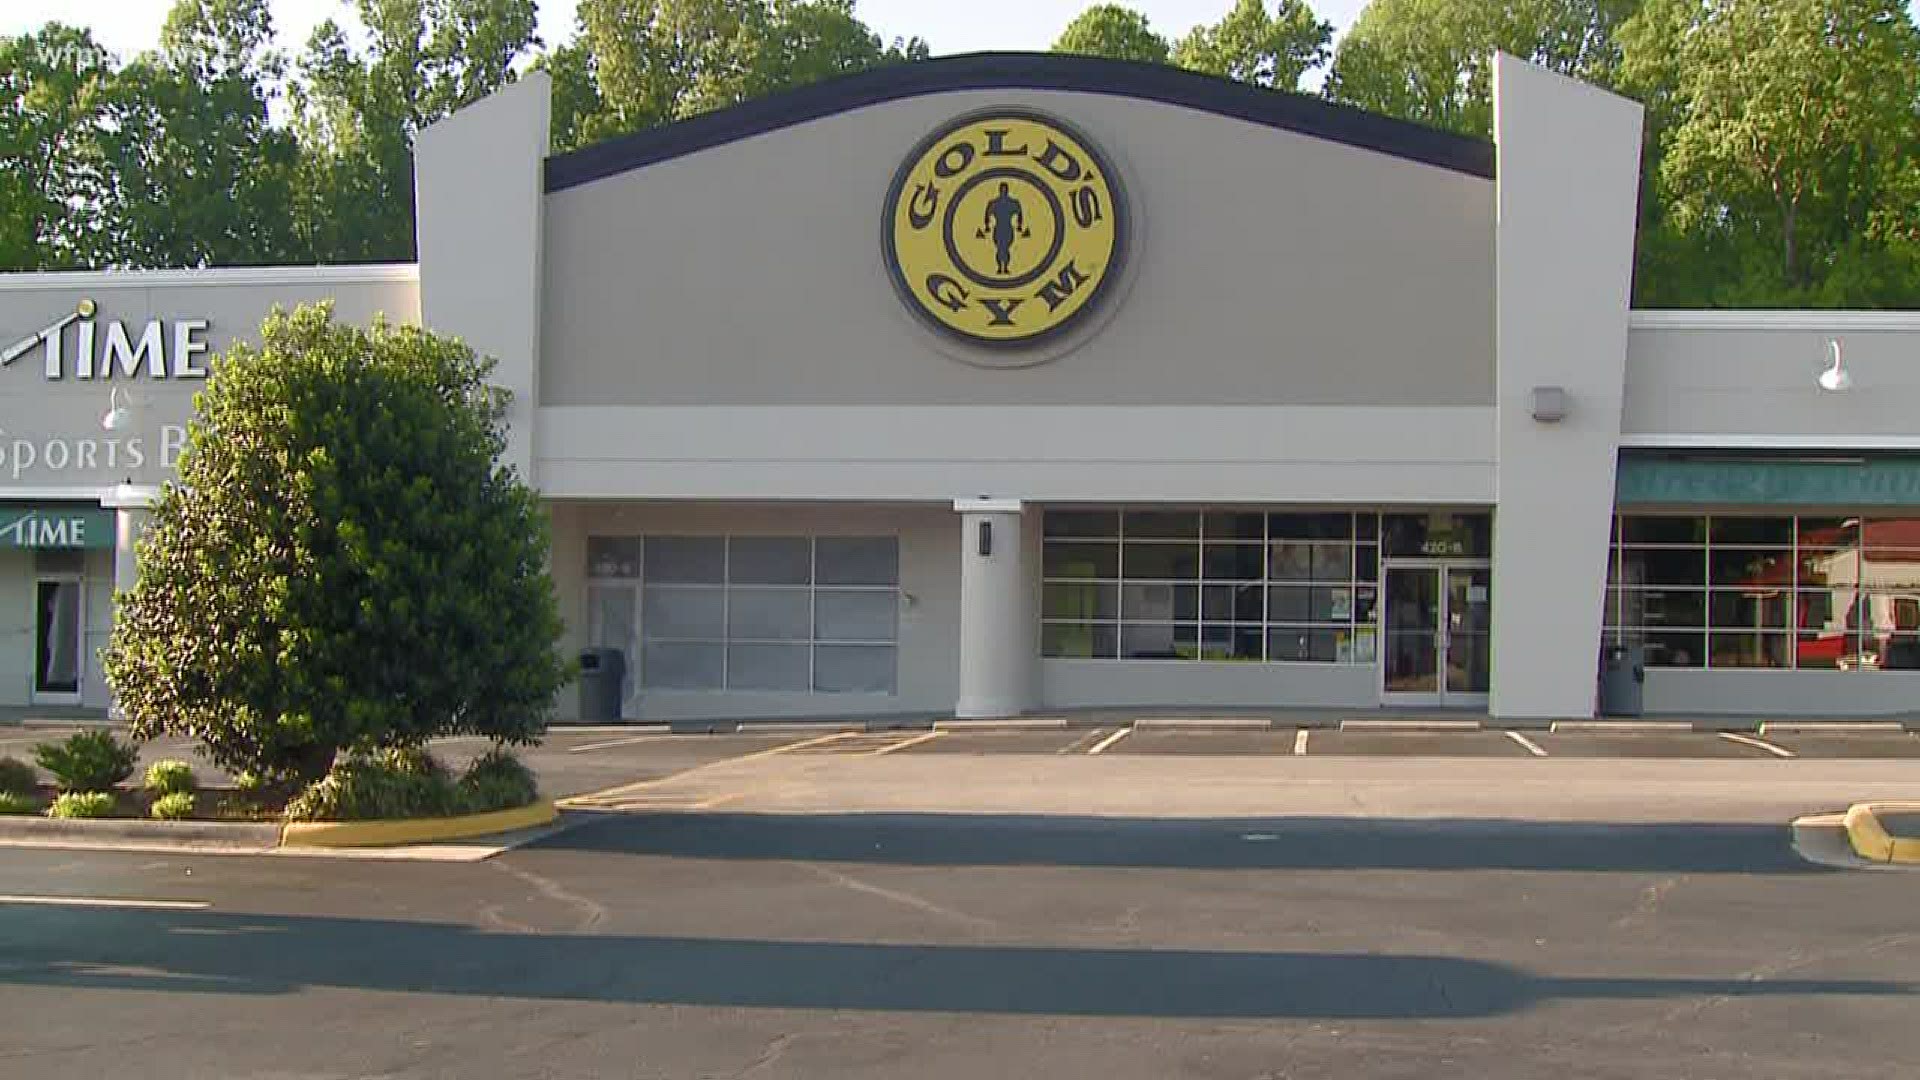 Gold's Gym President and CEO Adam Zeitsiff said the renegotiated filing will enable the company to emerge from the pandemic stronger and ready to grow.